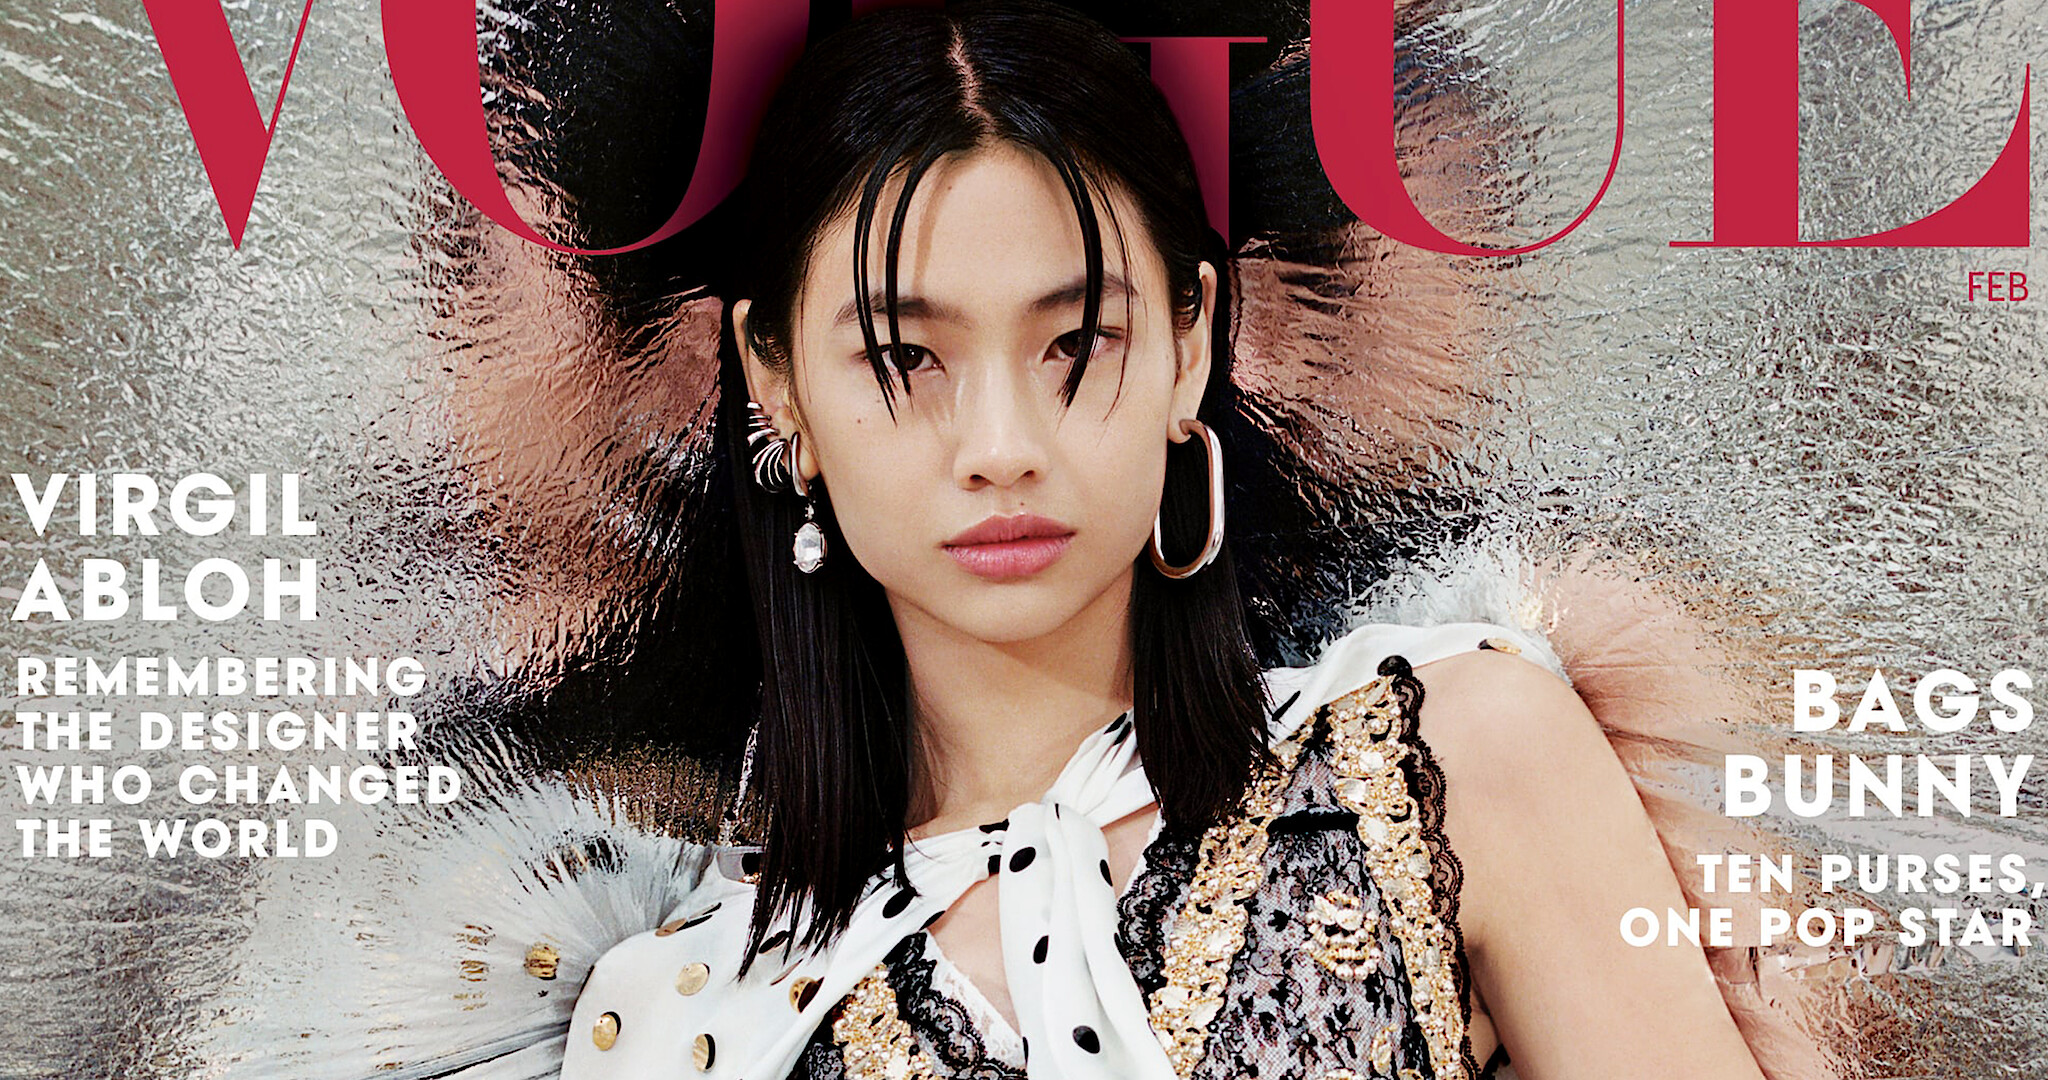 Squid Game' Star Hoyeon Jung Is Cover Girl for US 'Vogue